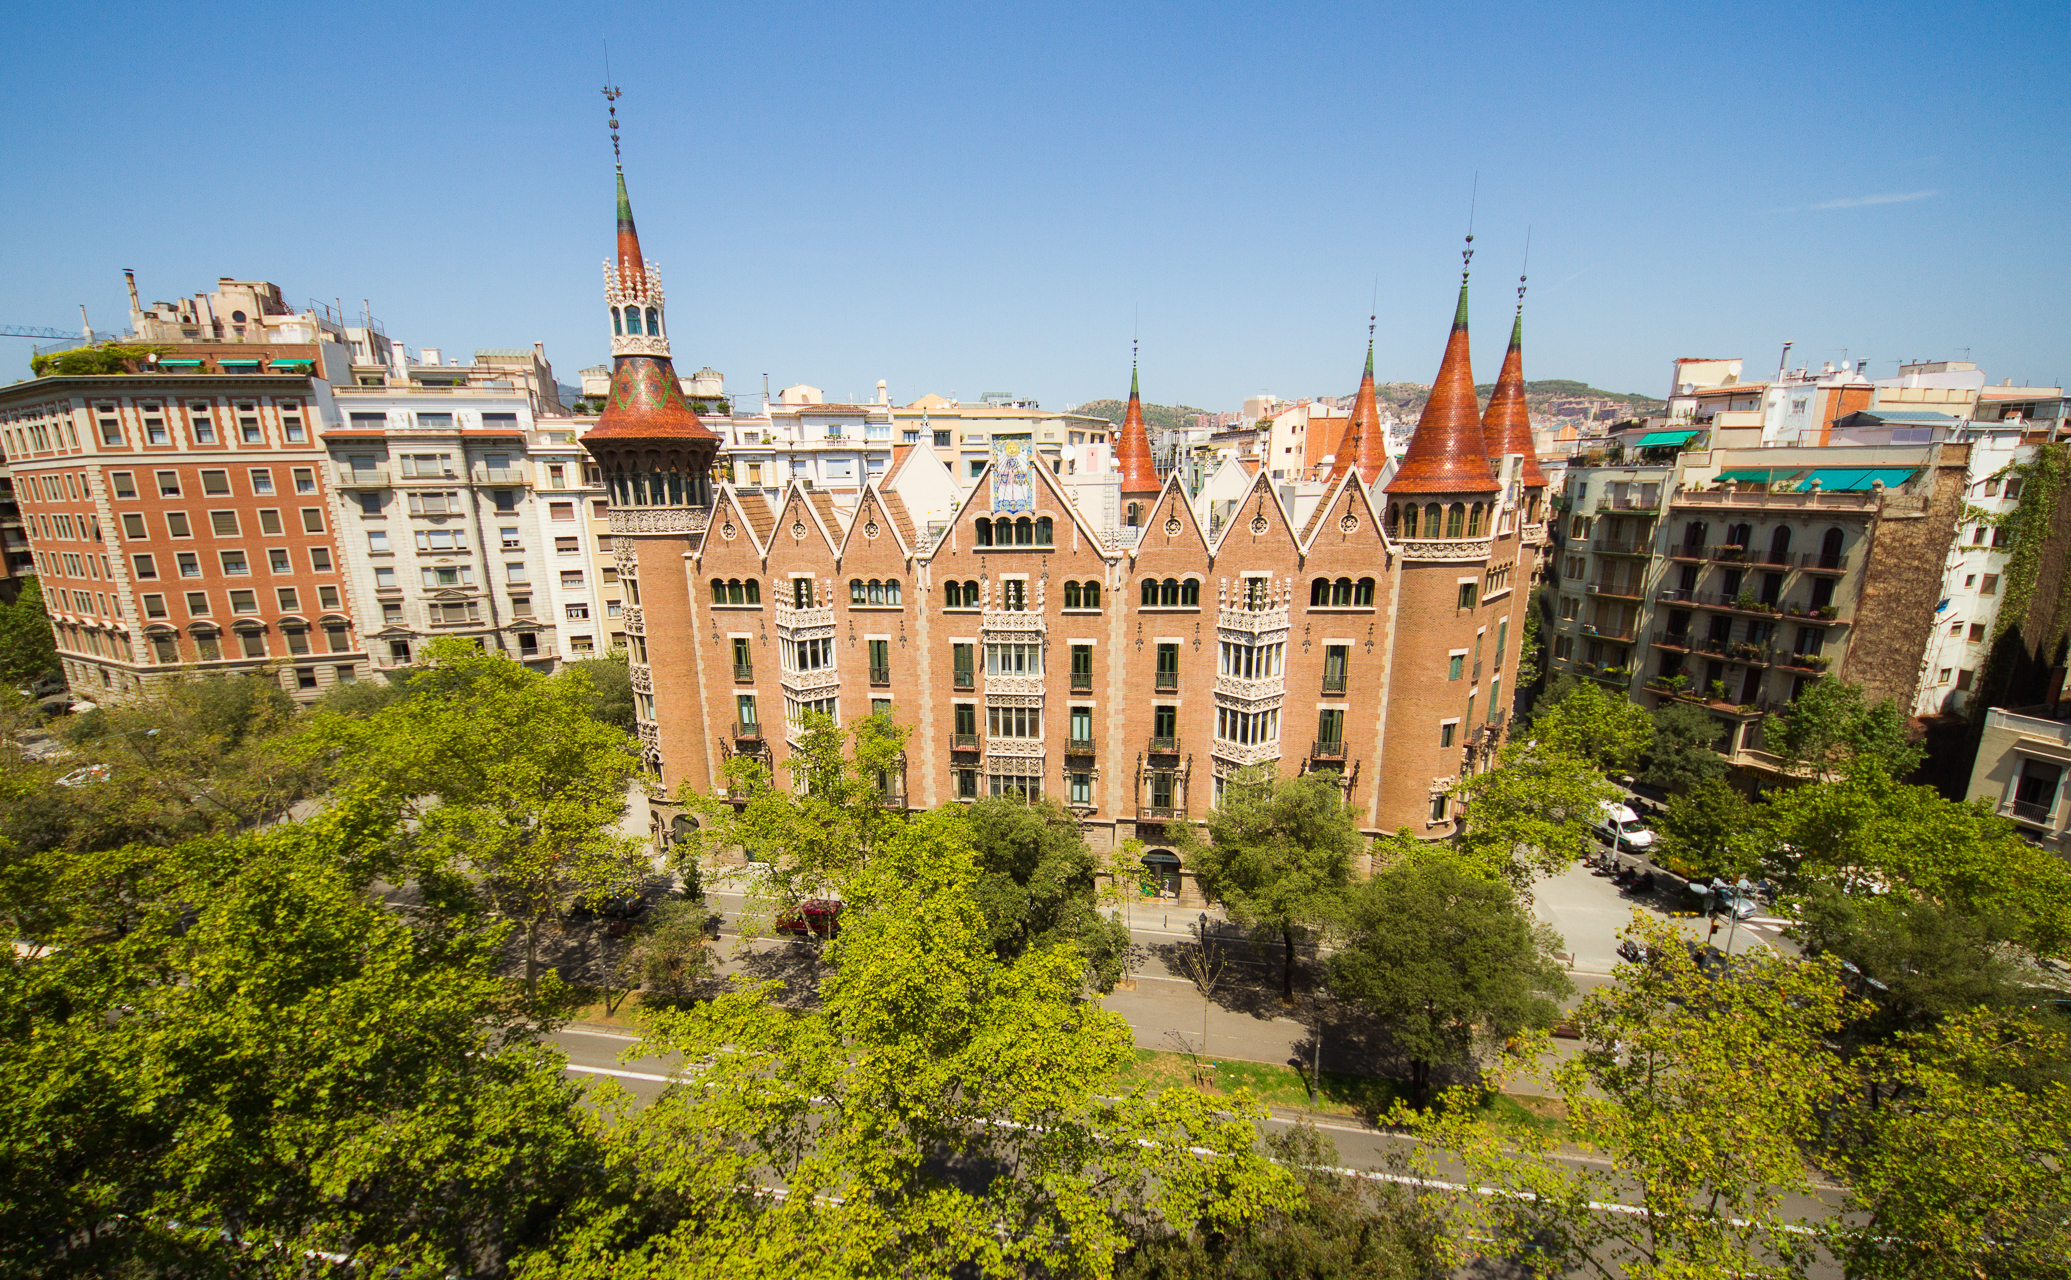 The modernist building 'Casa de les Punxes' standing in the middle of Barcelona's Avinguda Diagonal (by ACN)